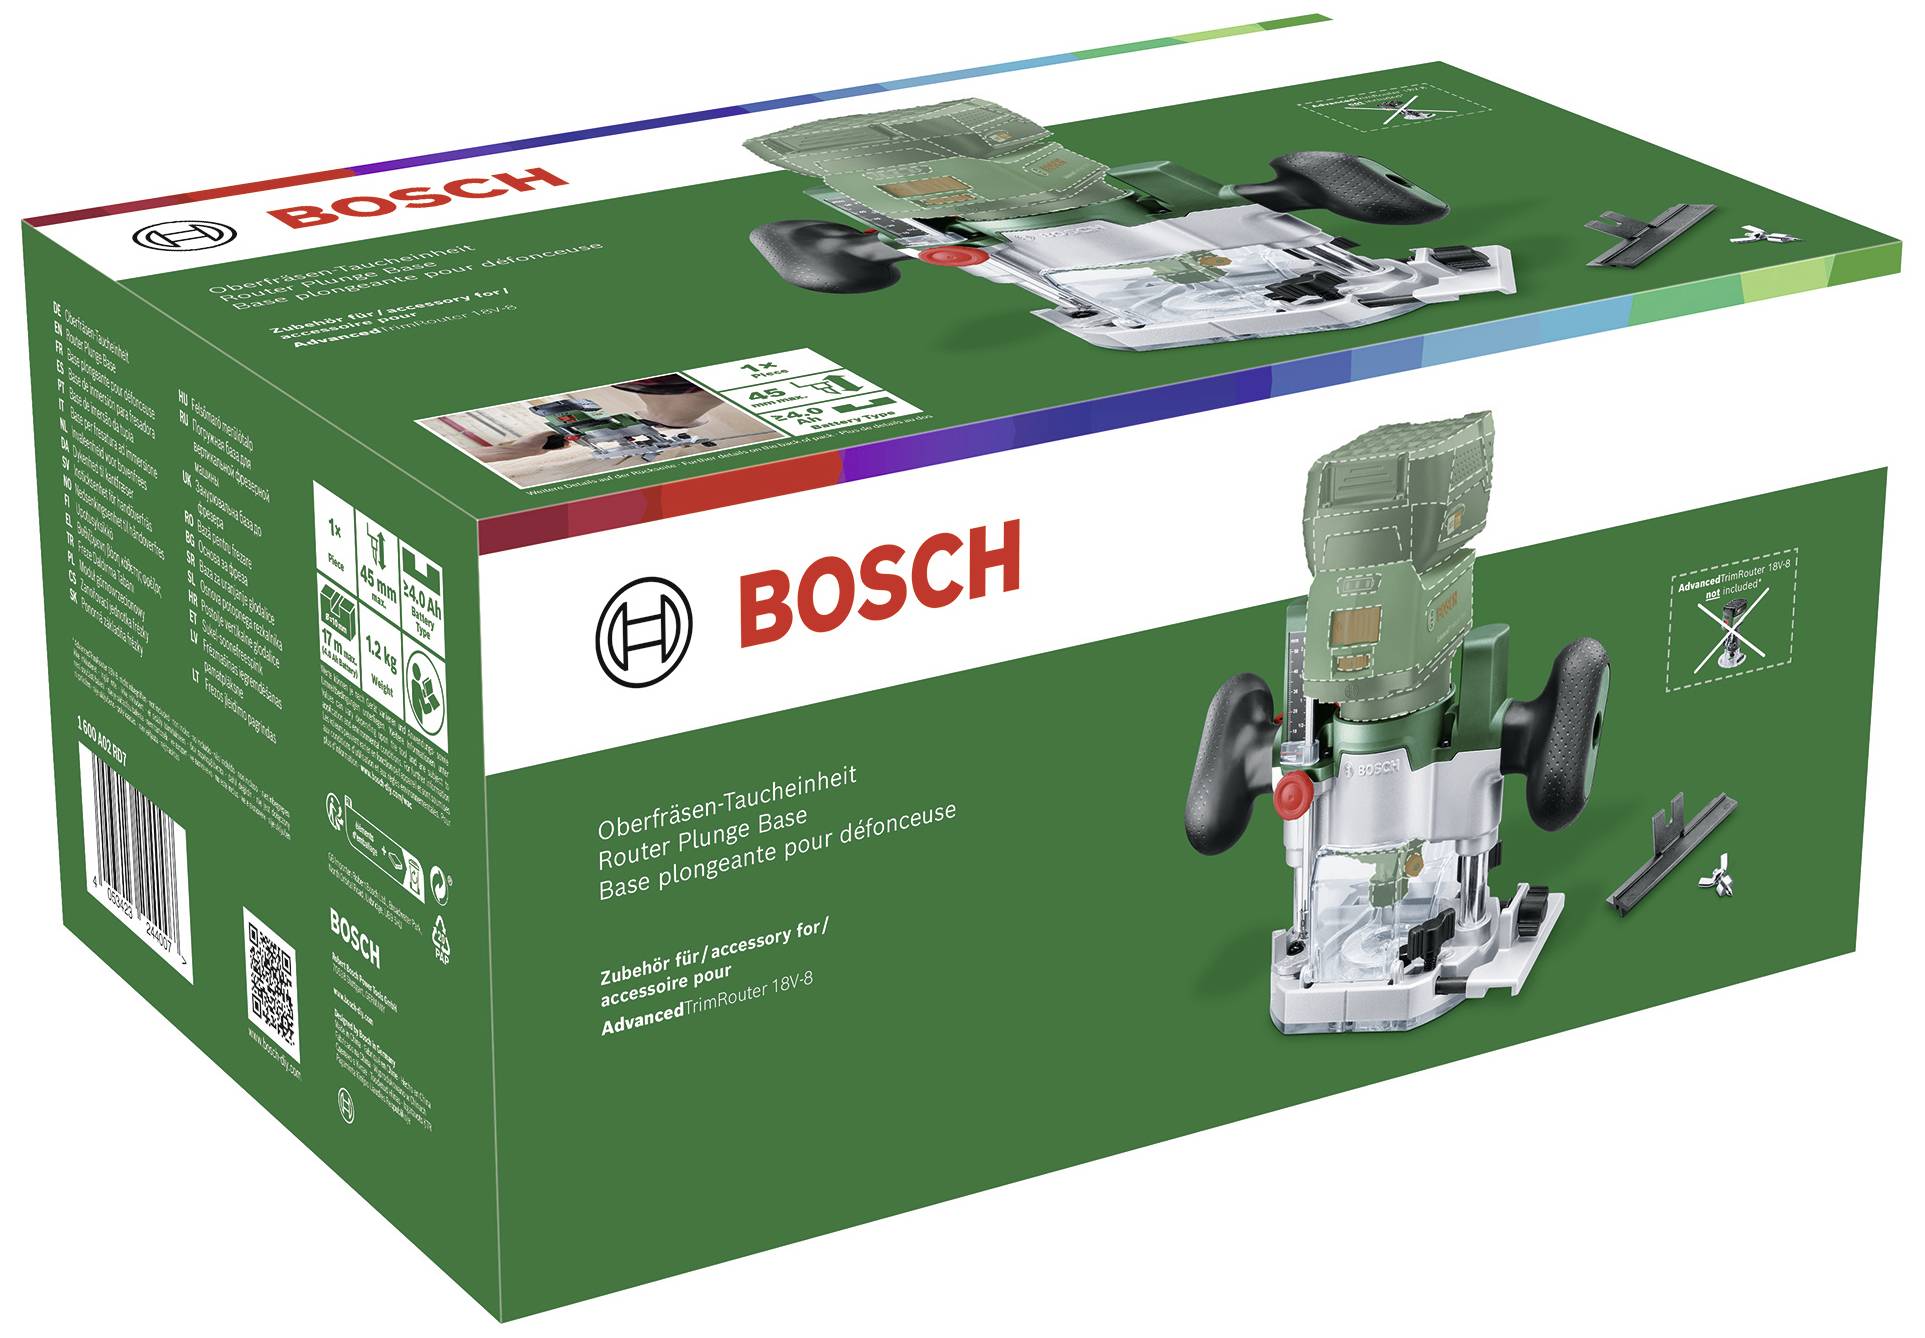 Addition for AdvancedTrimRouter 18V-8 from Bosch: New router plunge base  for DIYers - Bosch Media Service